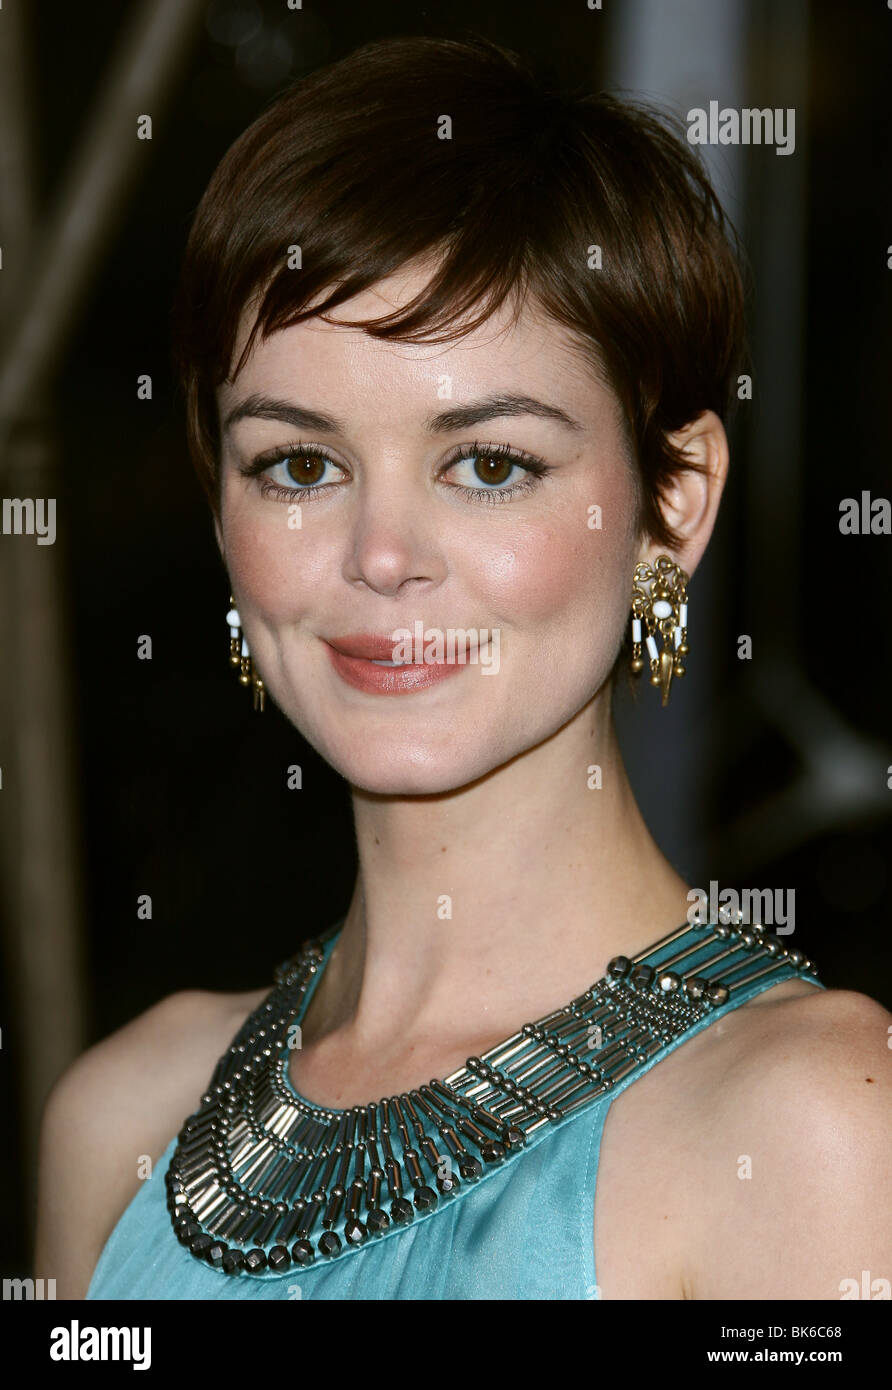 NORA ZEHETNER CLASH OF THE TITANS LOS ANGELES PREMIERE HOLLYWOOD LOS ANGELES CA USA 31 March 2010 Stock Photo